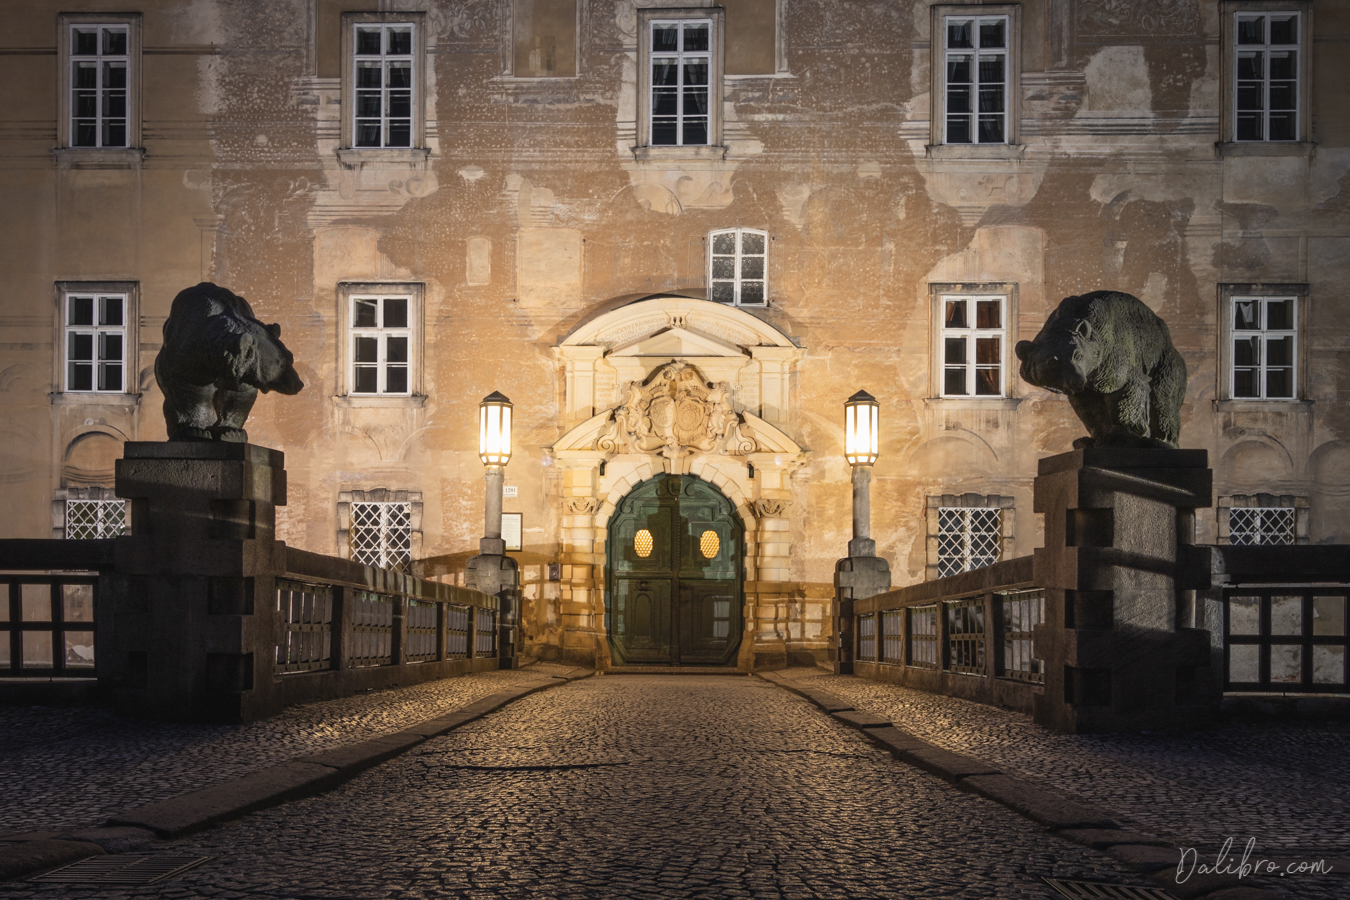 The main entrance of the castle, guarded by bears, Nove Mesto nad Metuji, Czech Republic